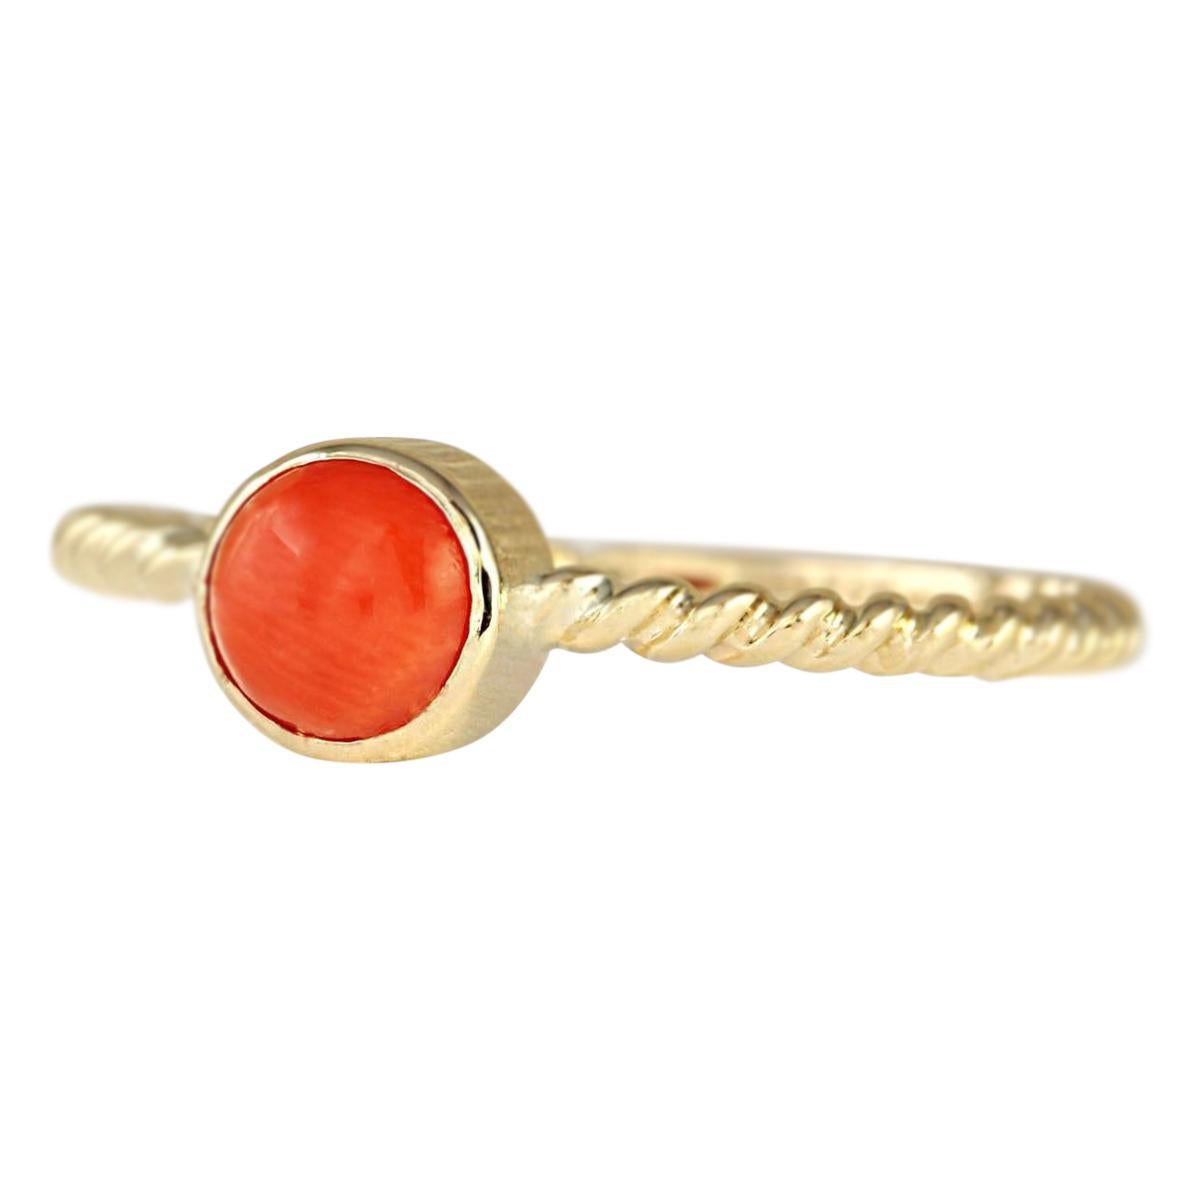 Stamped: 14K Yellow Gold
Total Ring Weight: 2.2 Grams
Total Natural Coral Weight is 1.00 Carat
Color: Red
Face Measures: 6.00x6.00 mm
Sku: [703225W]